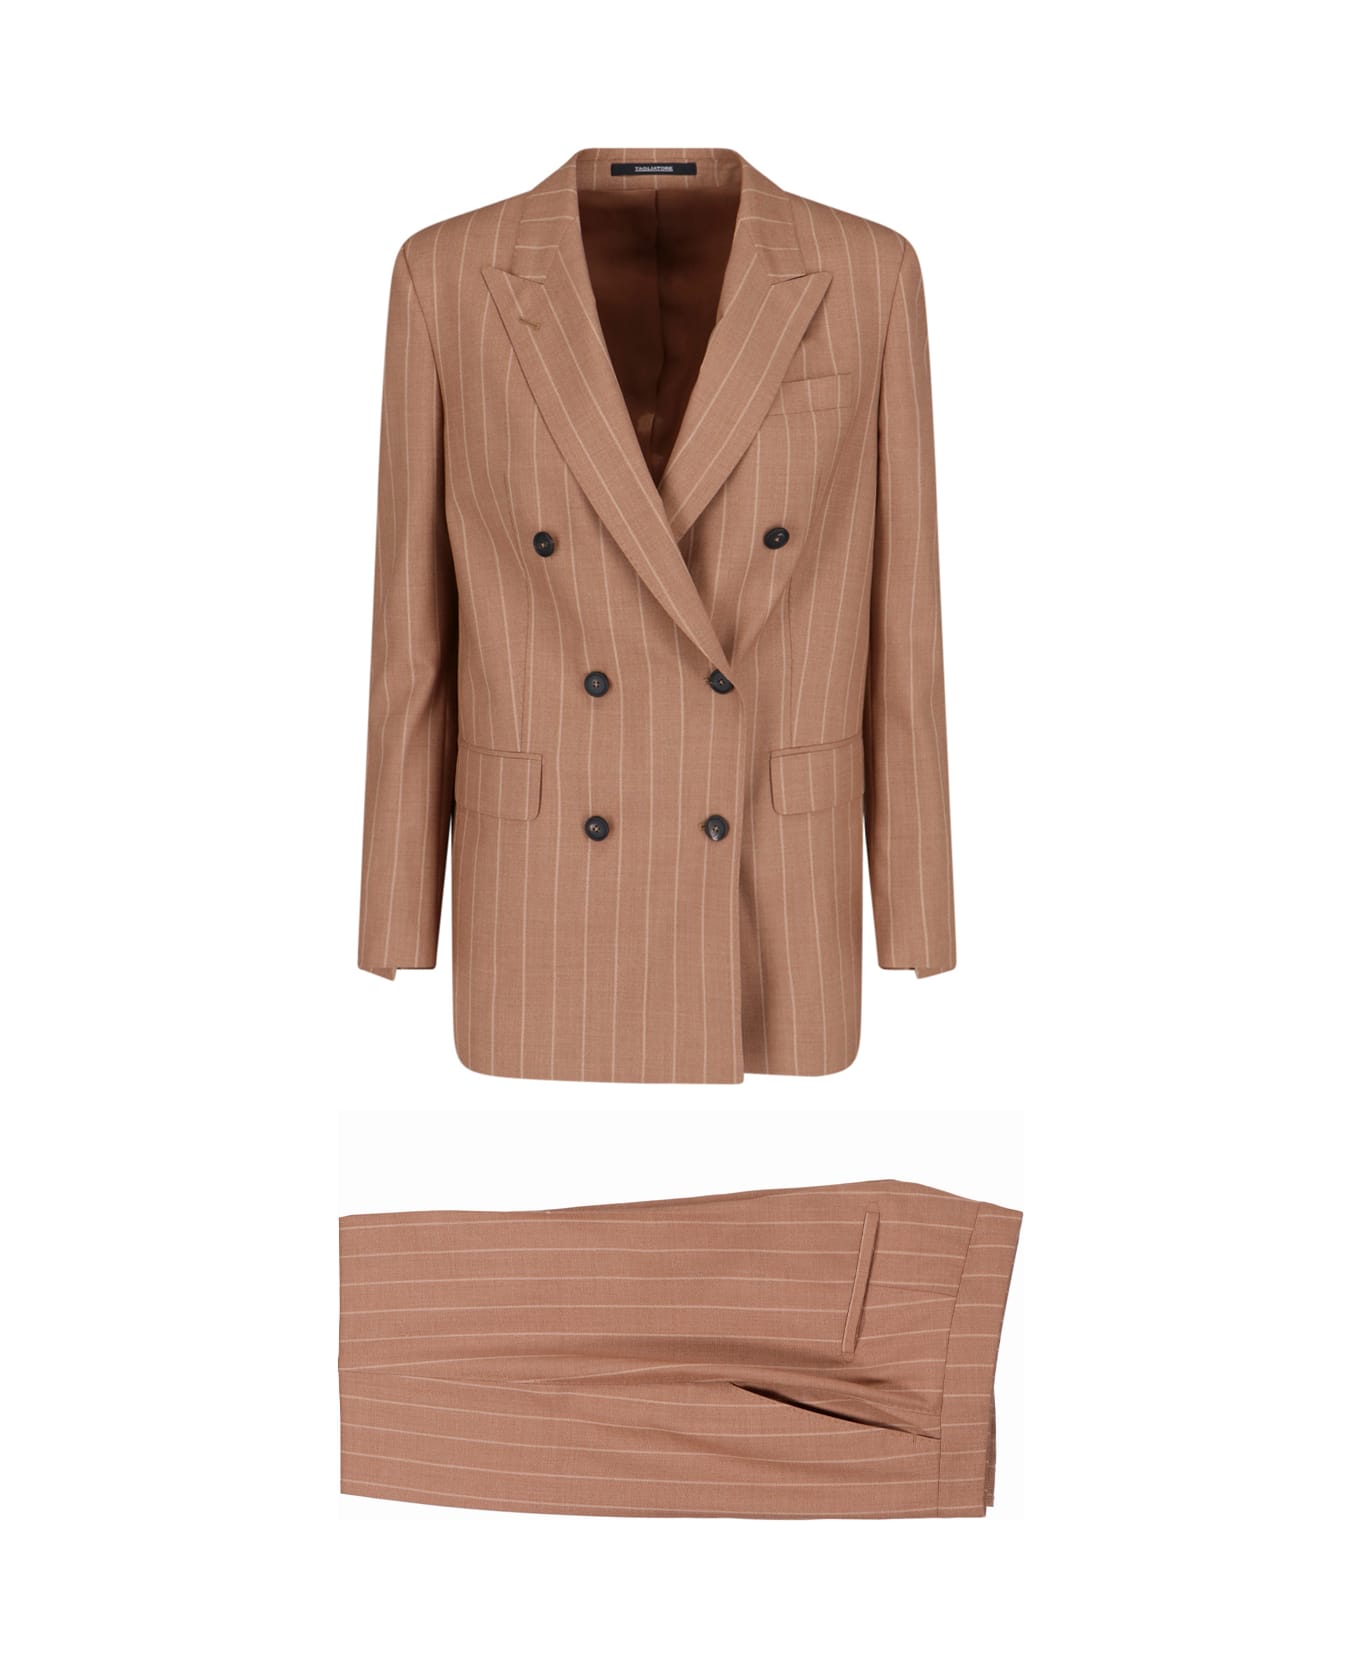 Tagliatore Double-breasted Suit - Brown ブレザー